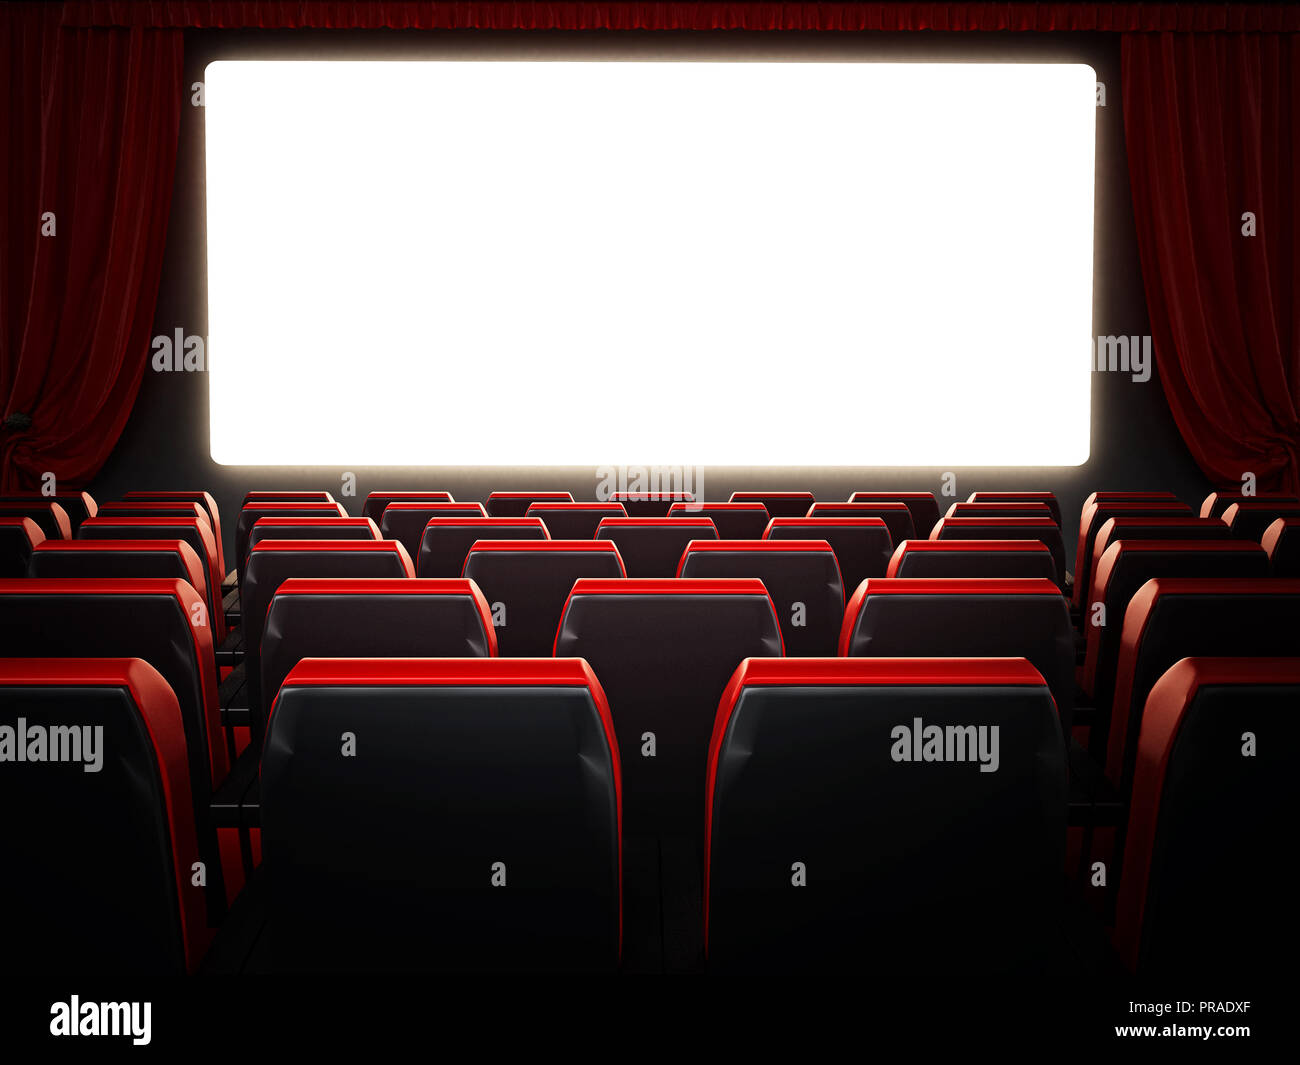 Empty red movie theater seats and blank cinema screen. 3D illustration. Stock Photo